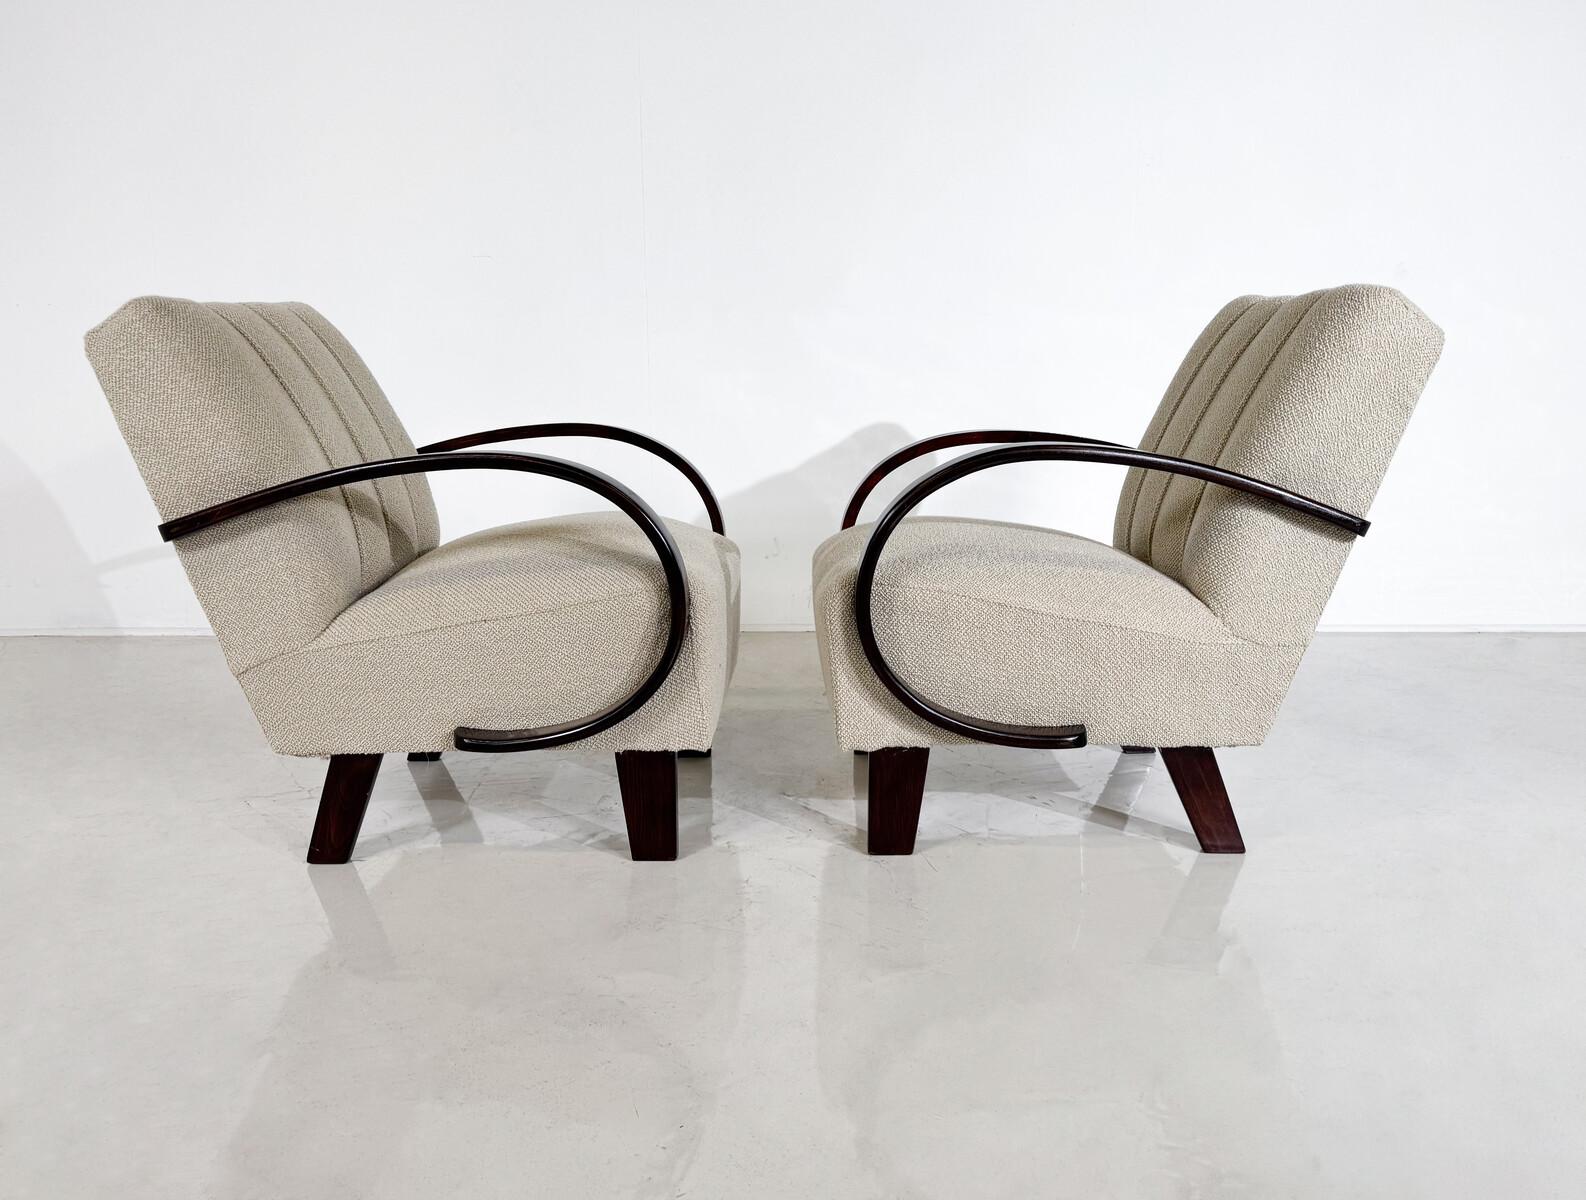 Pair of Bentwood Armchairs by Jindrich Halabala - Czech Republic 1940s For Sale 3